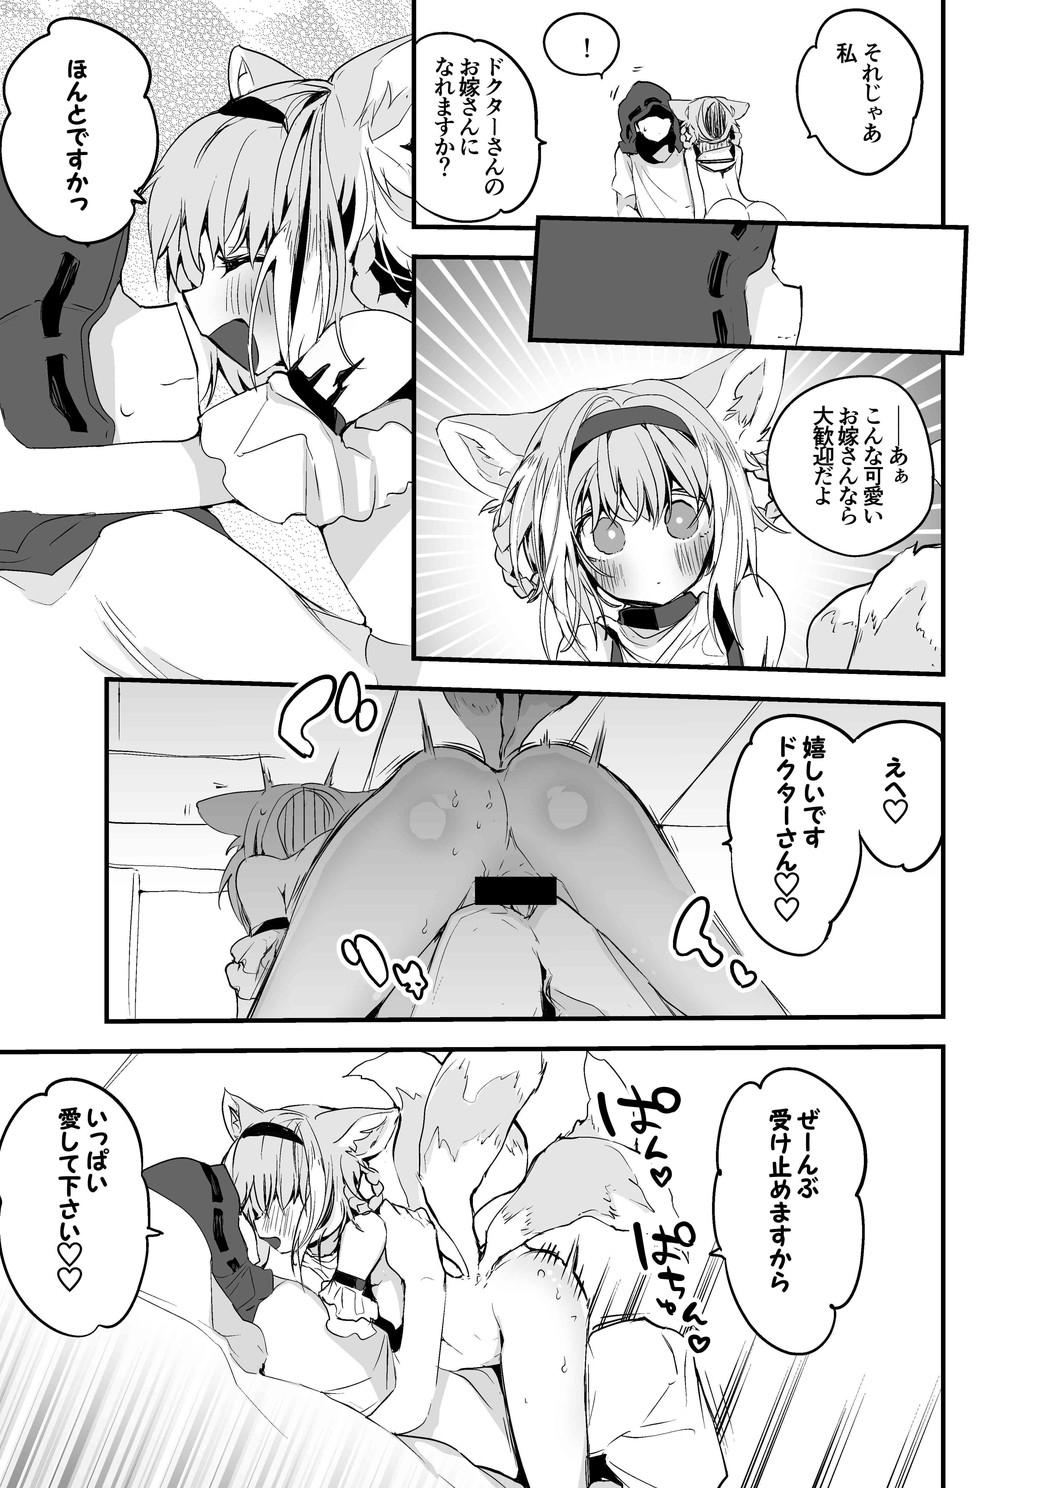 Sesso お願いスズラン編 - Arknights Amateurs Gone Wild - Page 6